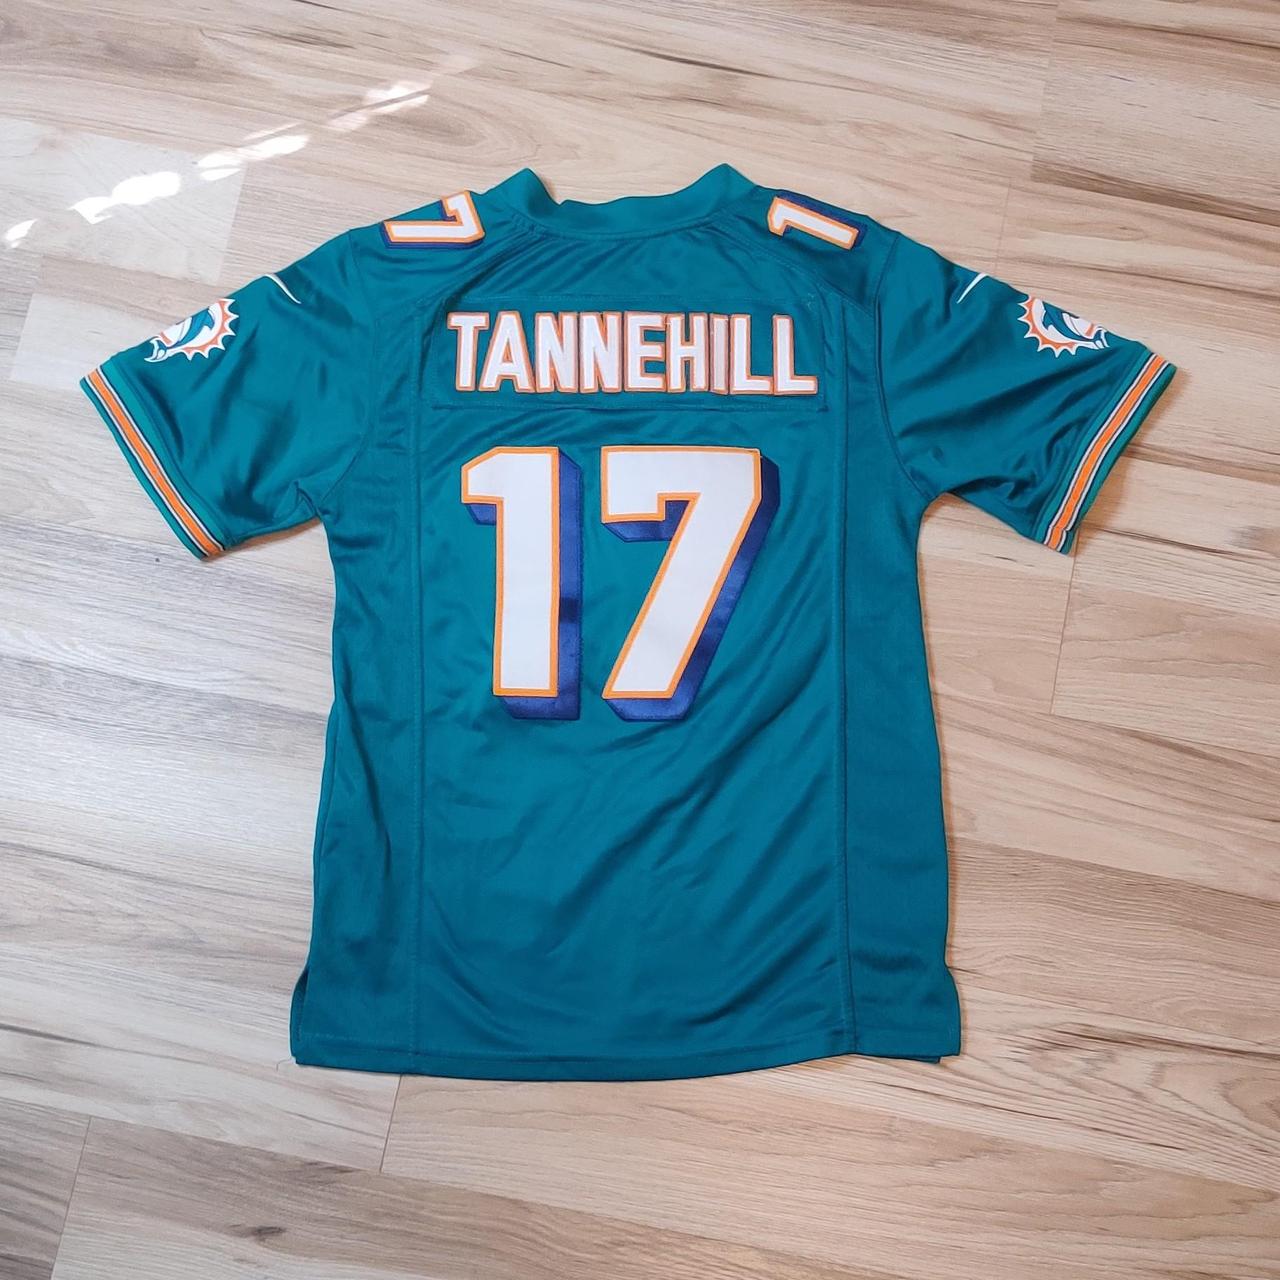 NIKE NFL ON FIELD MIAMI DOLPHINS TANNEHILL STITCHED - Depop